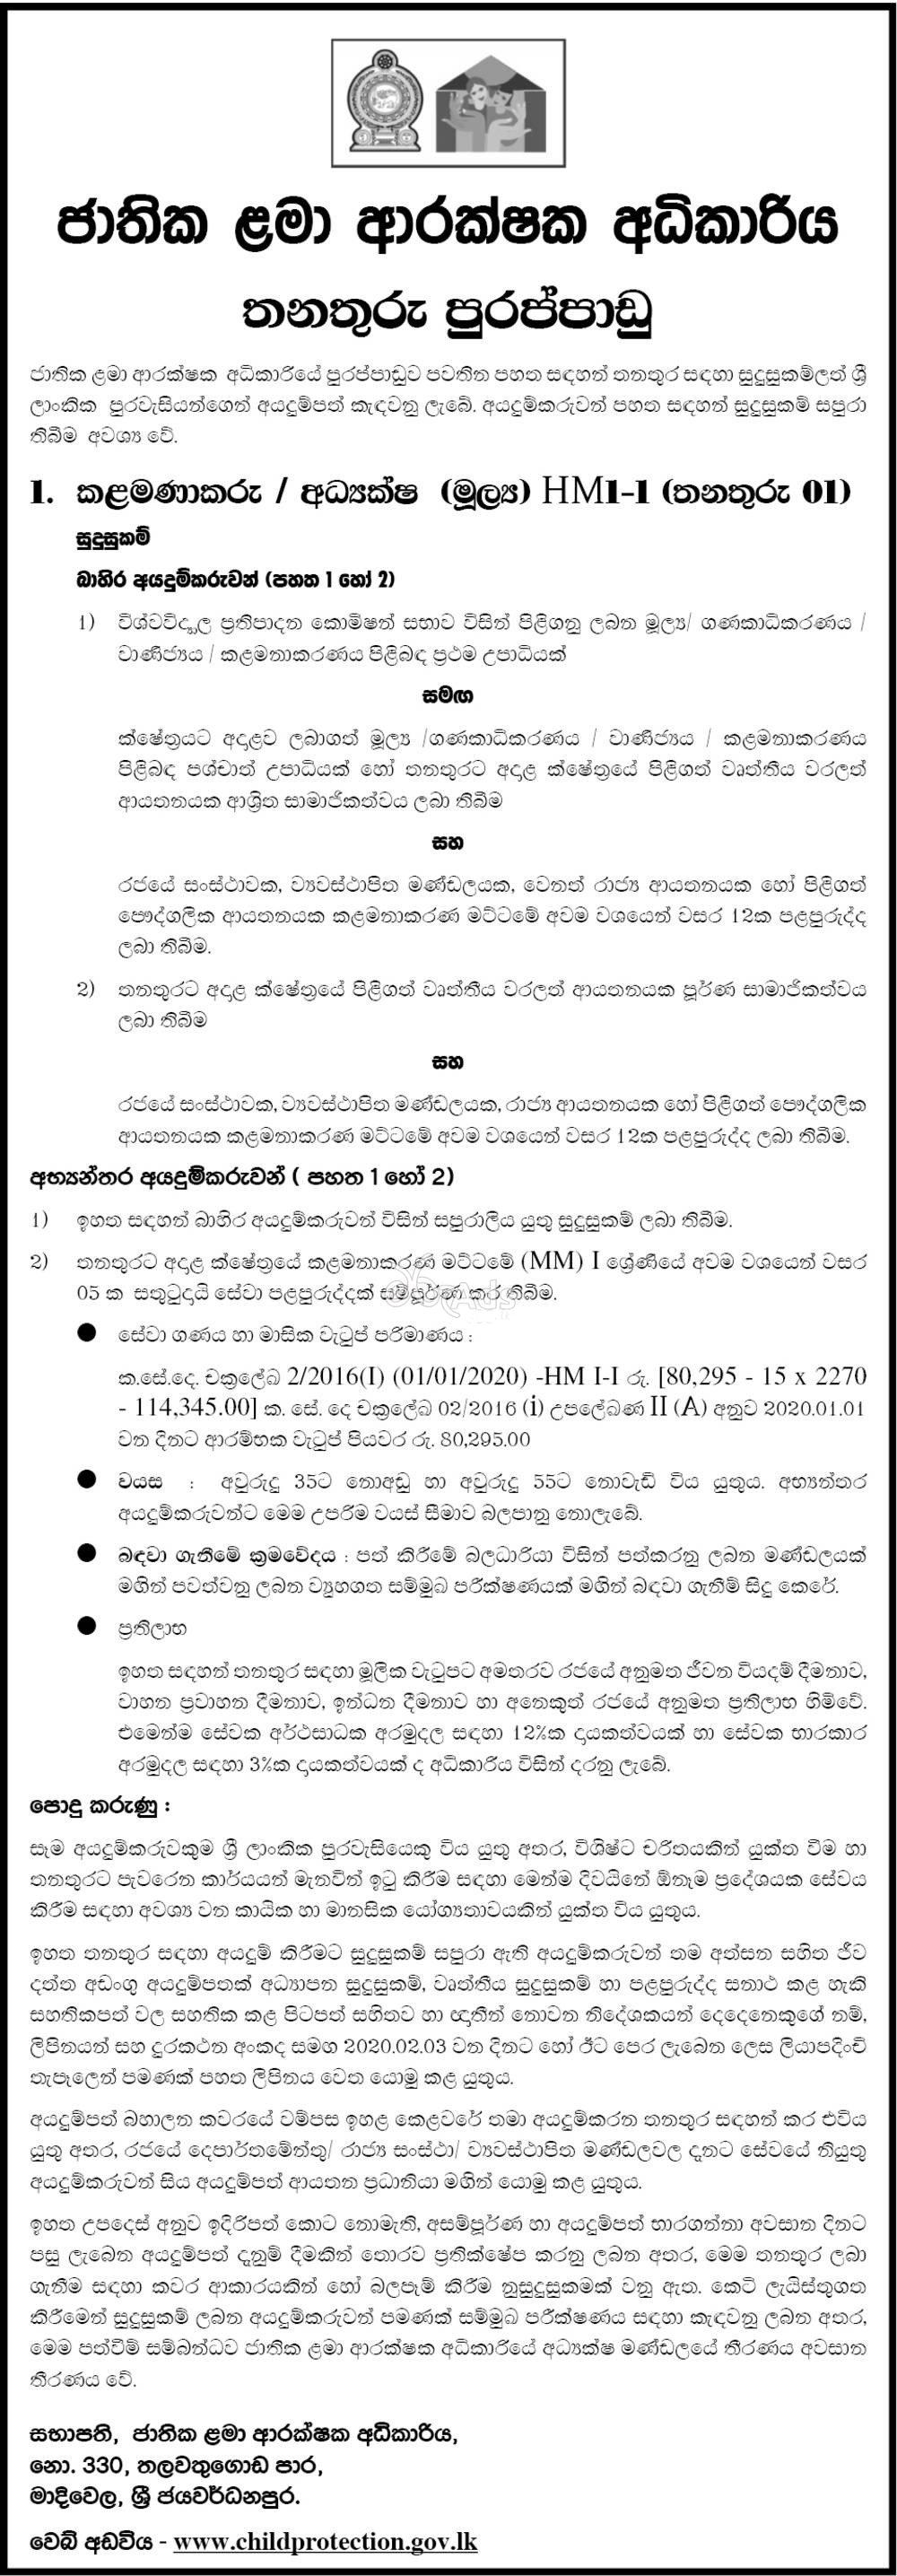 Manager/ Director (Finance) - National Child Protection Authority Job Vacancies 2020 